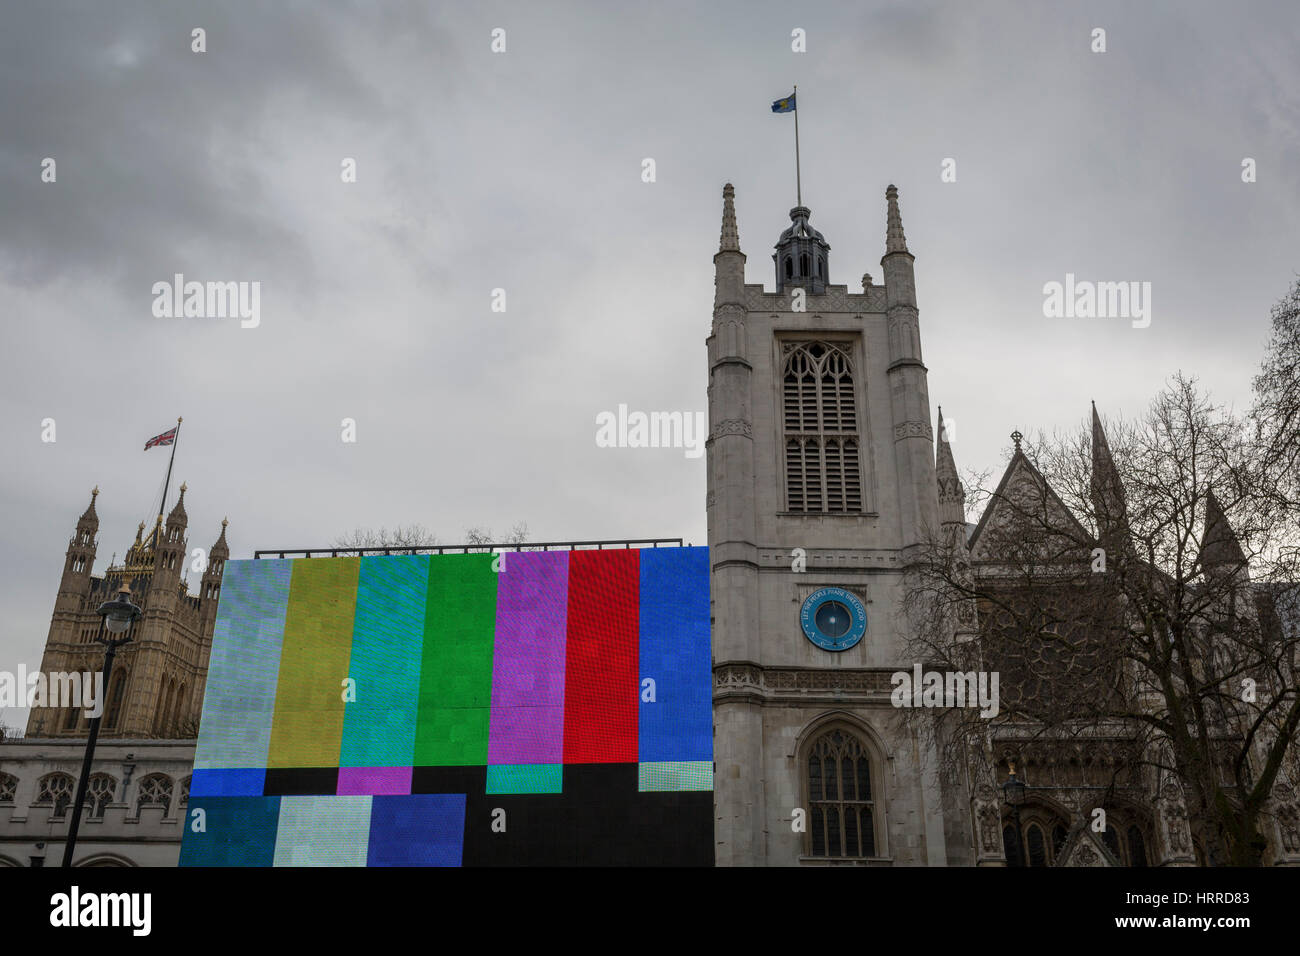 Colour bars on a giant TV screen seen in Parliament Square and outside Westminster Abbey, on 20th February 2017, in London, England. SMPTE color bars is a television test pattern used where the NTSC video standard is utilized, including countries in North America. The Society of Motion Picture and Television Engineers (SMPTE) refers to this test pattern as Engineering Guideline EG 1-1990. Stock Photo